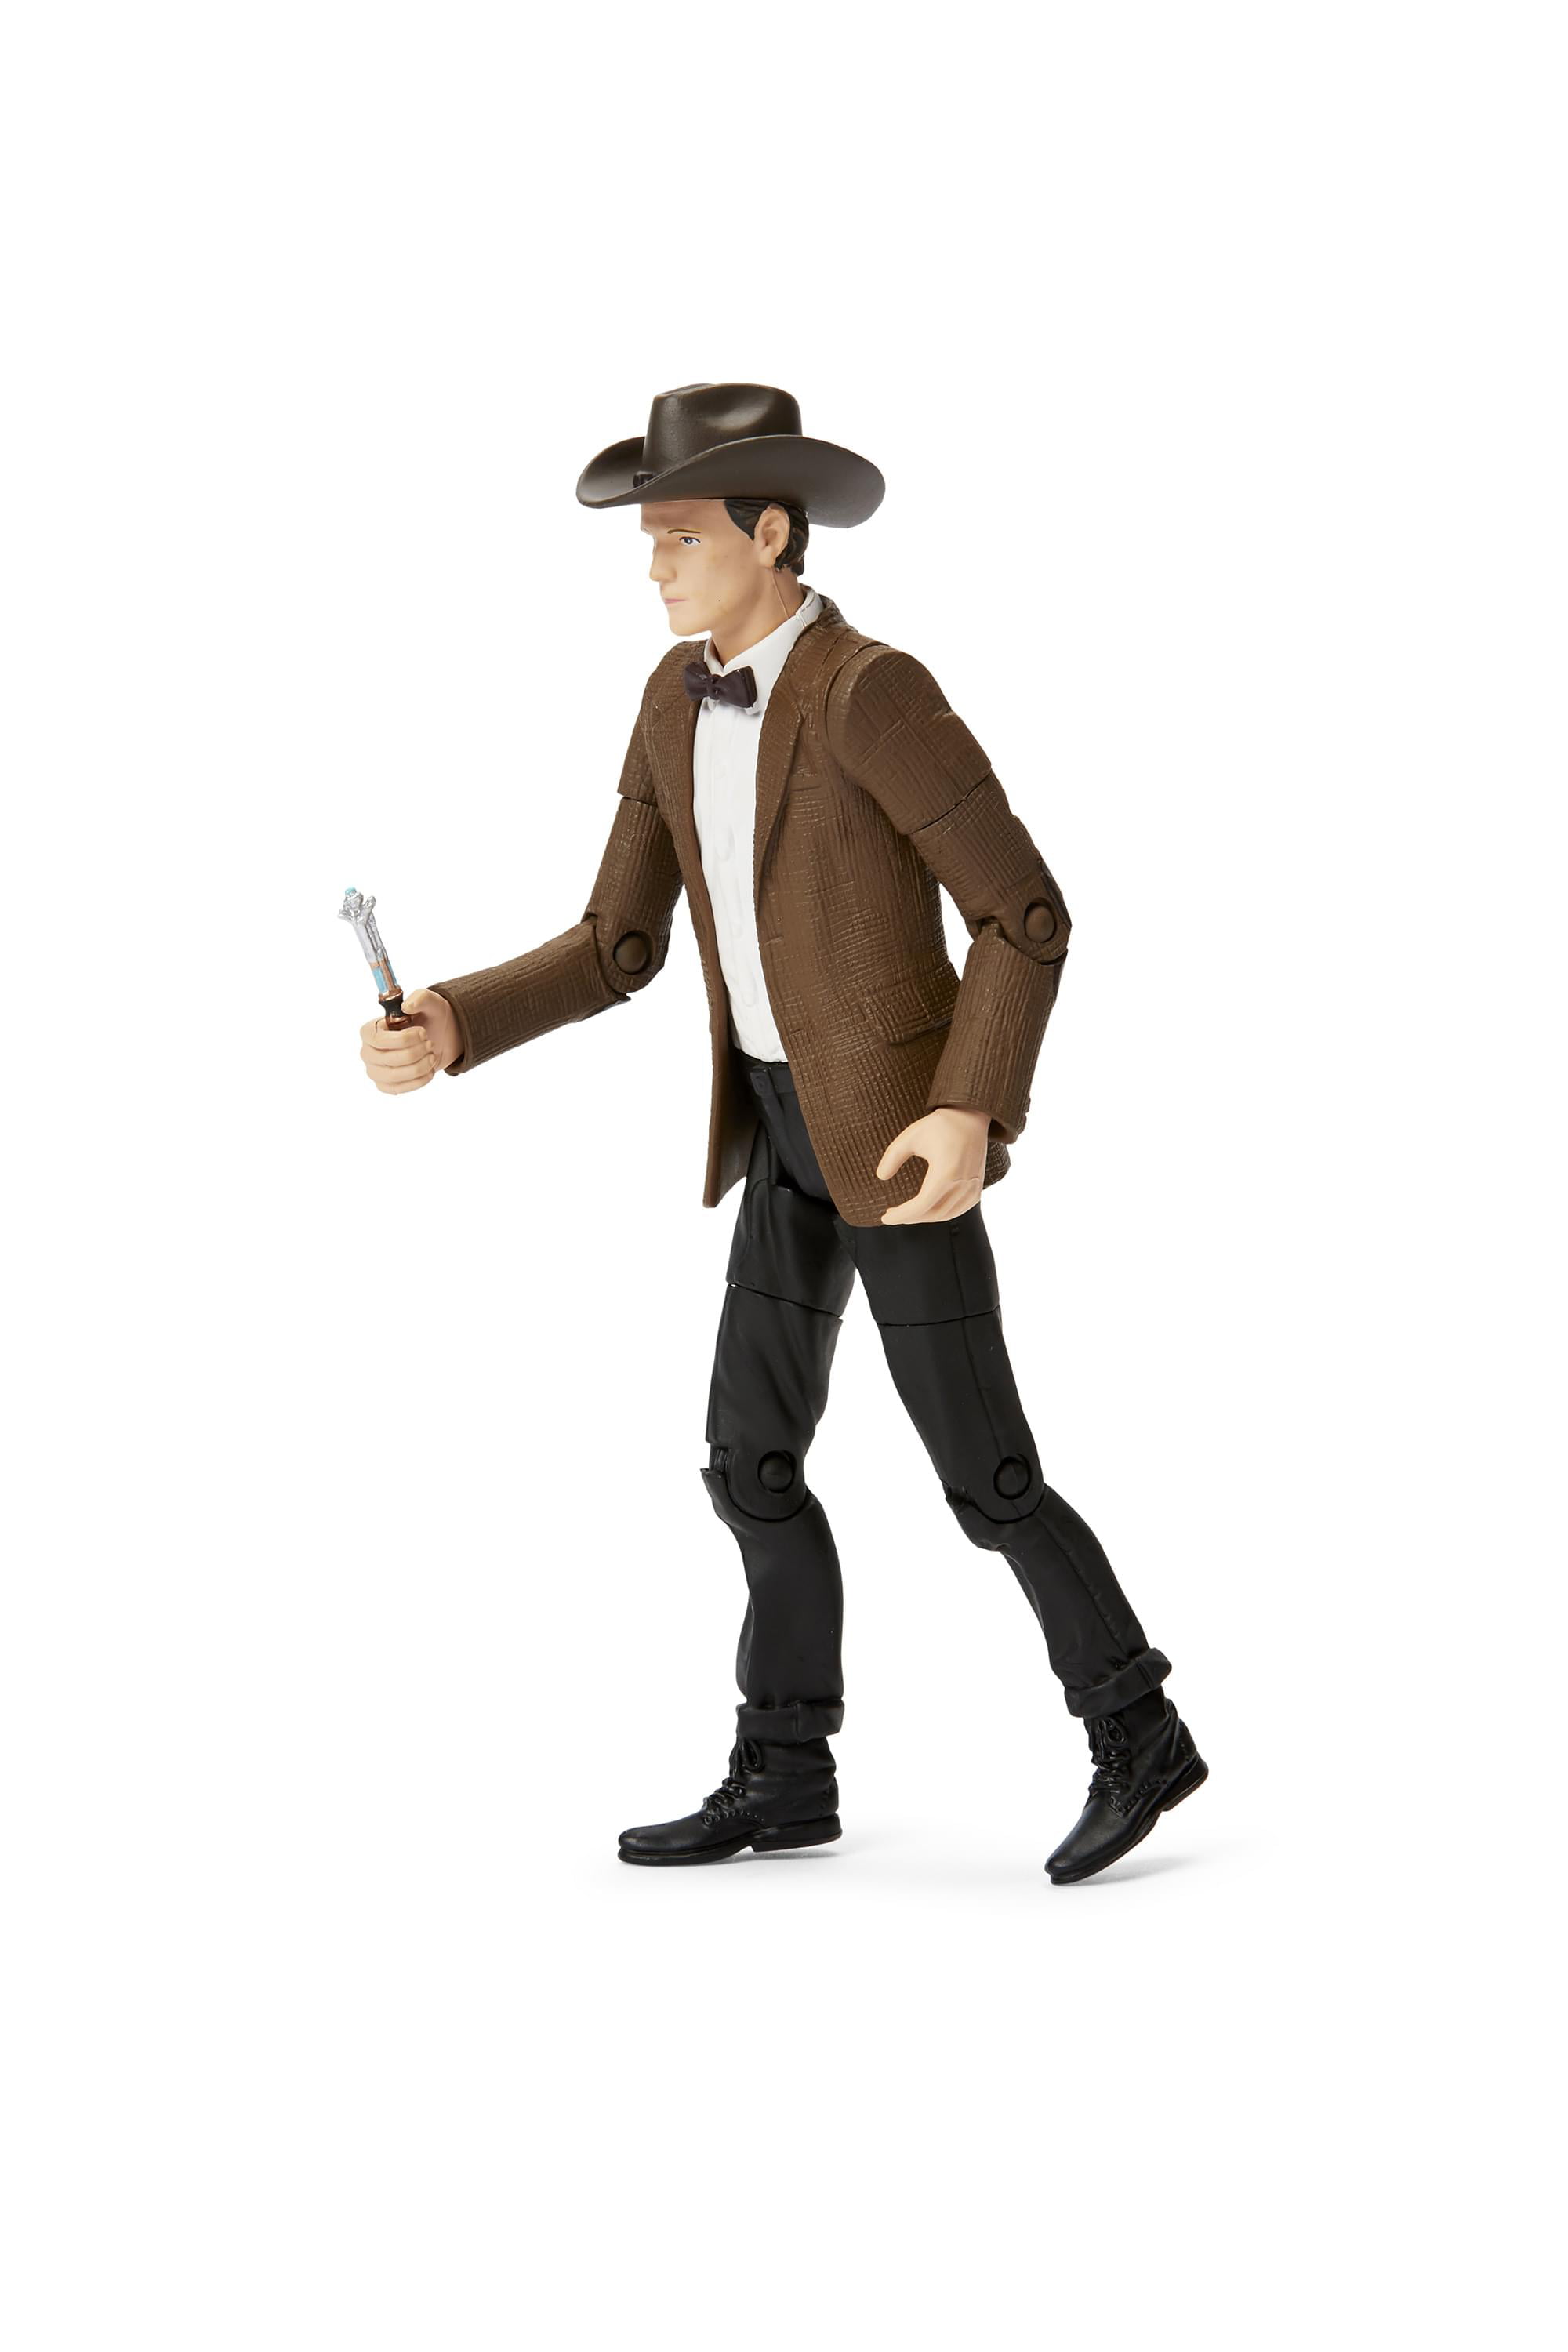 Doctor Dr Who the Eleventh 11th Dr Matt Smith Cowboy Hat Action figure 5.5" 